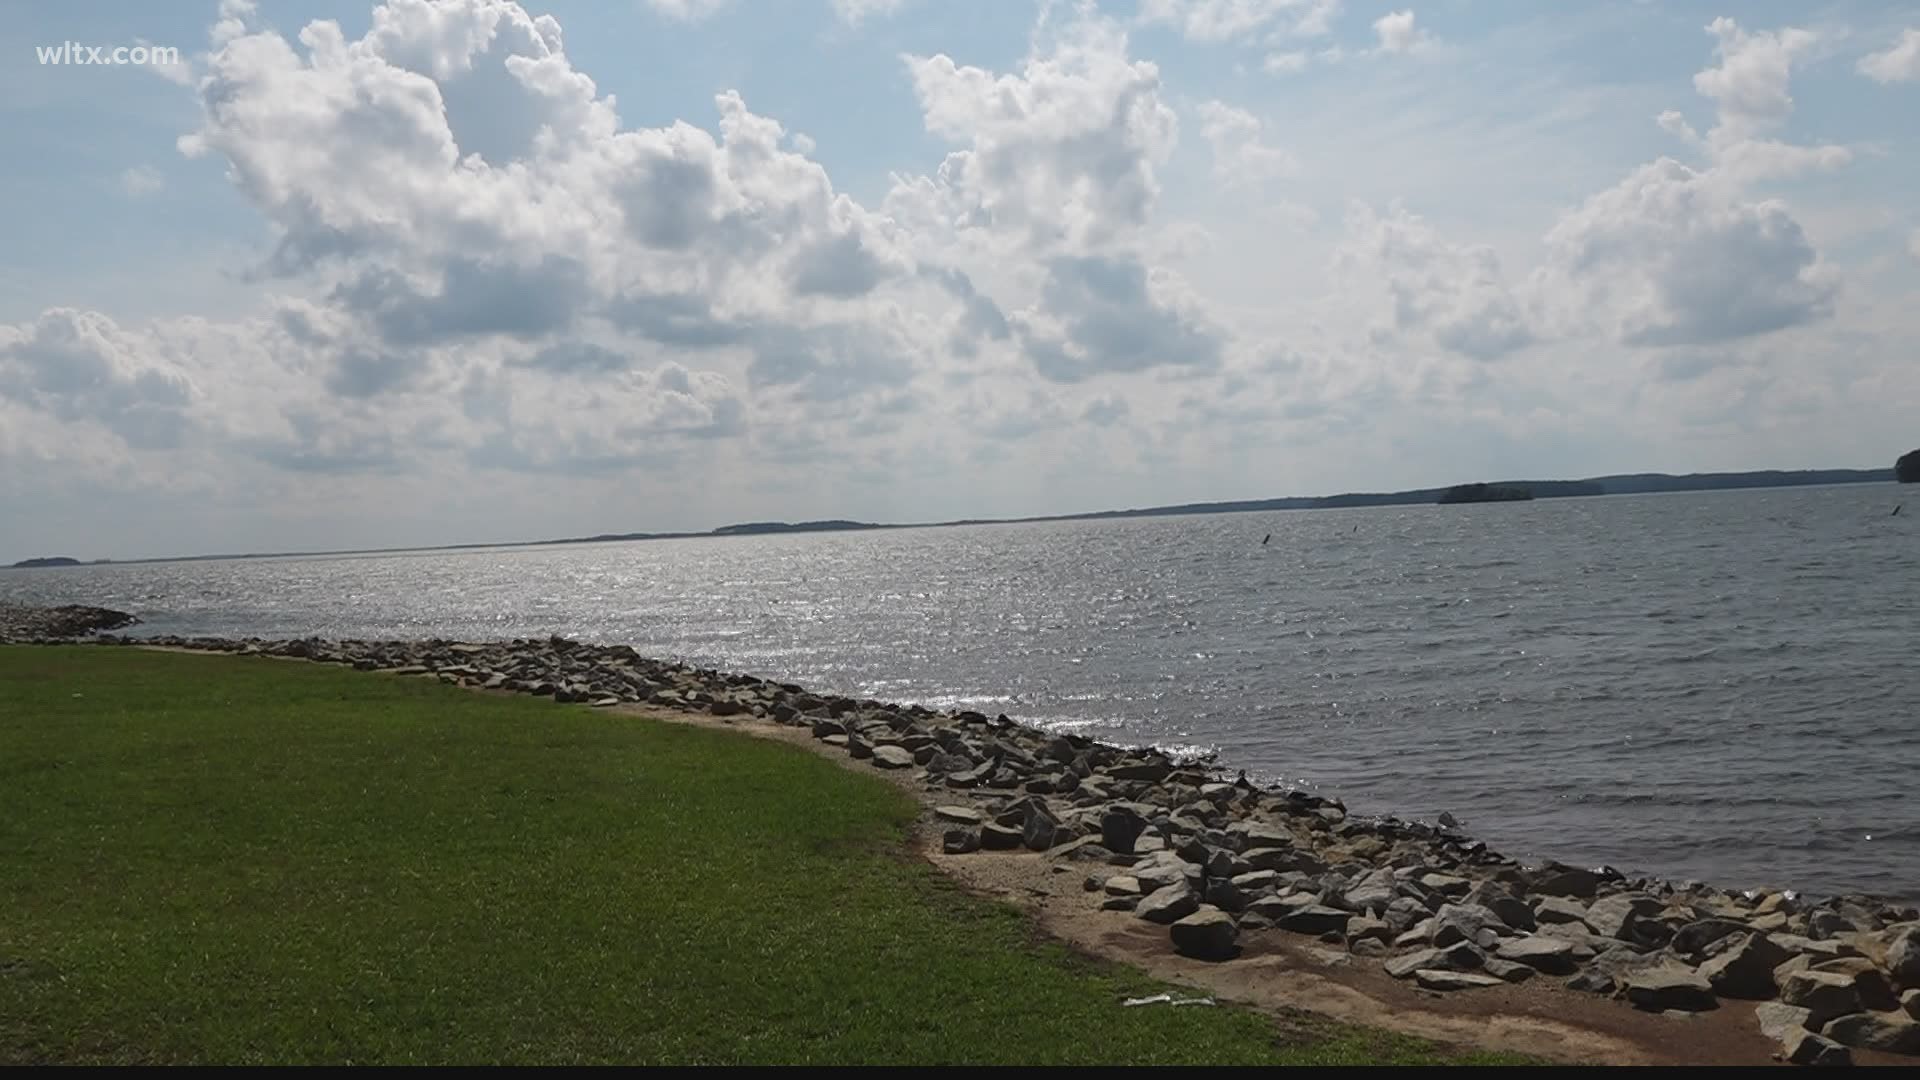 A six-year-old and a 19-year-old both drowned in separate incidents at Lake Monticello within a week.